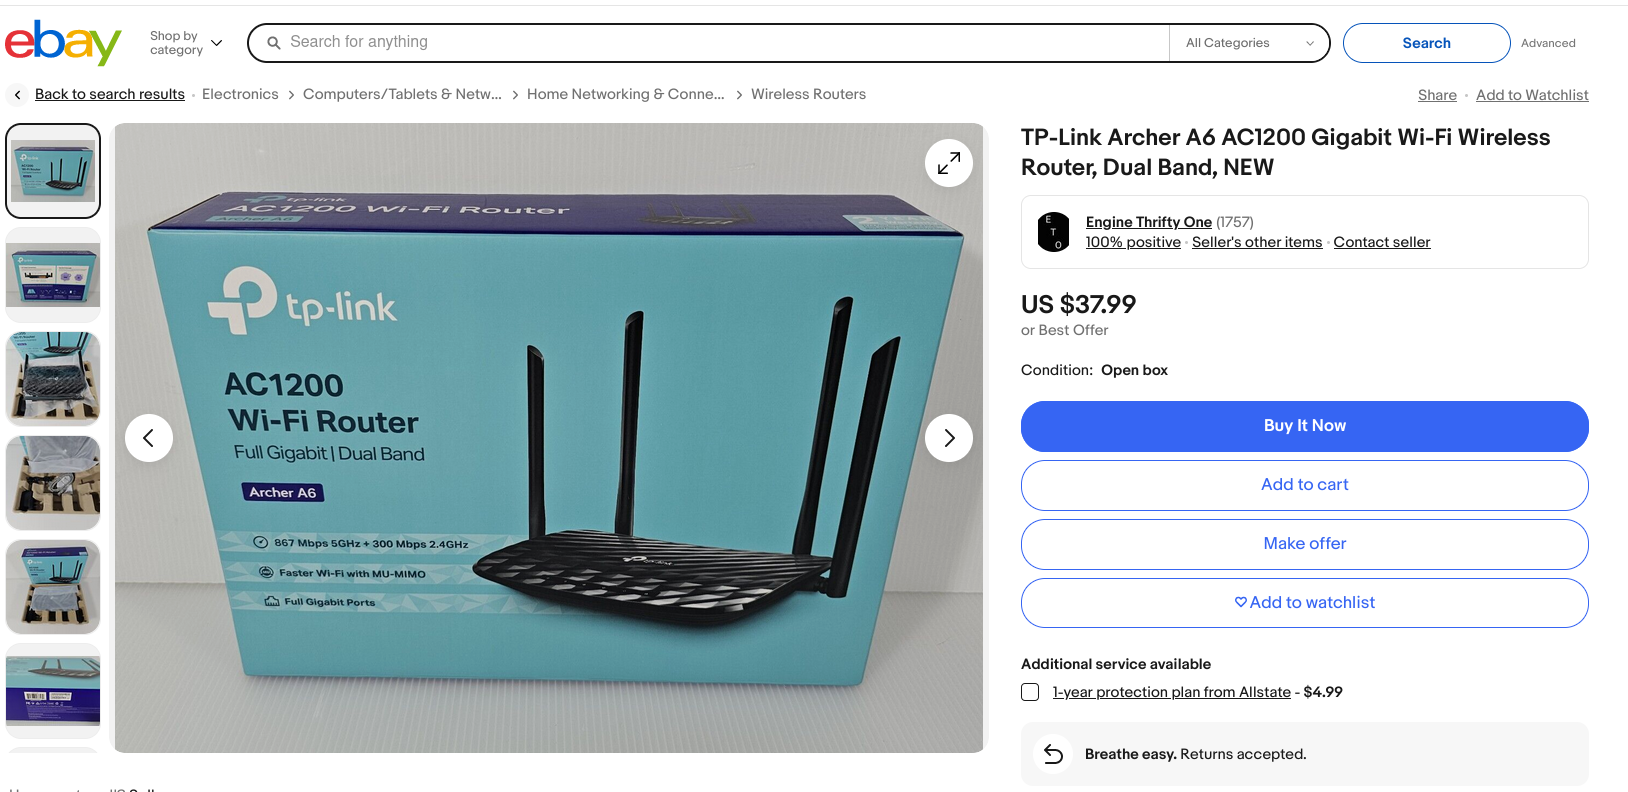 Screenshot of &ldquo;TP-Link Archer A6 AC1200 Gigabit Wi-Fi Wireless Router, Dual Band, NEW&rdquo; eBay page, with price listed as US $37.99